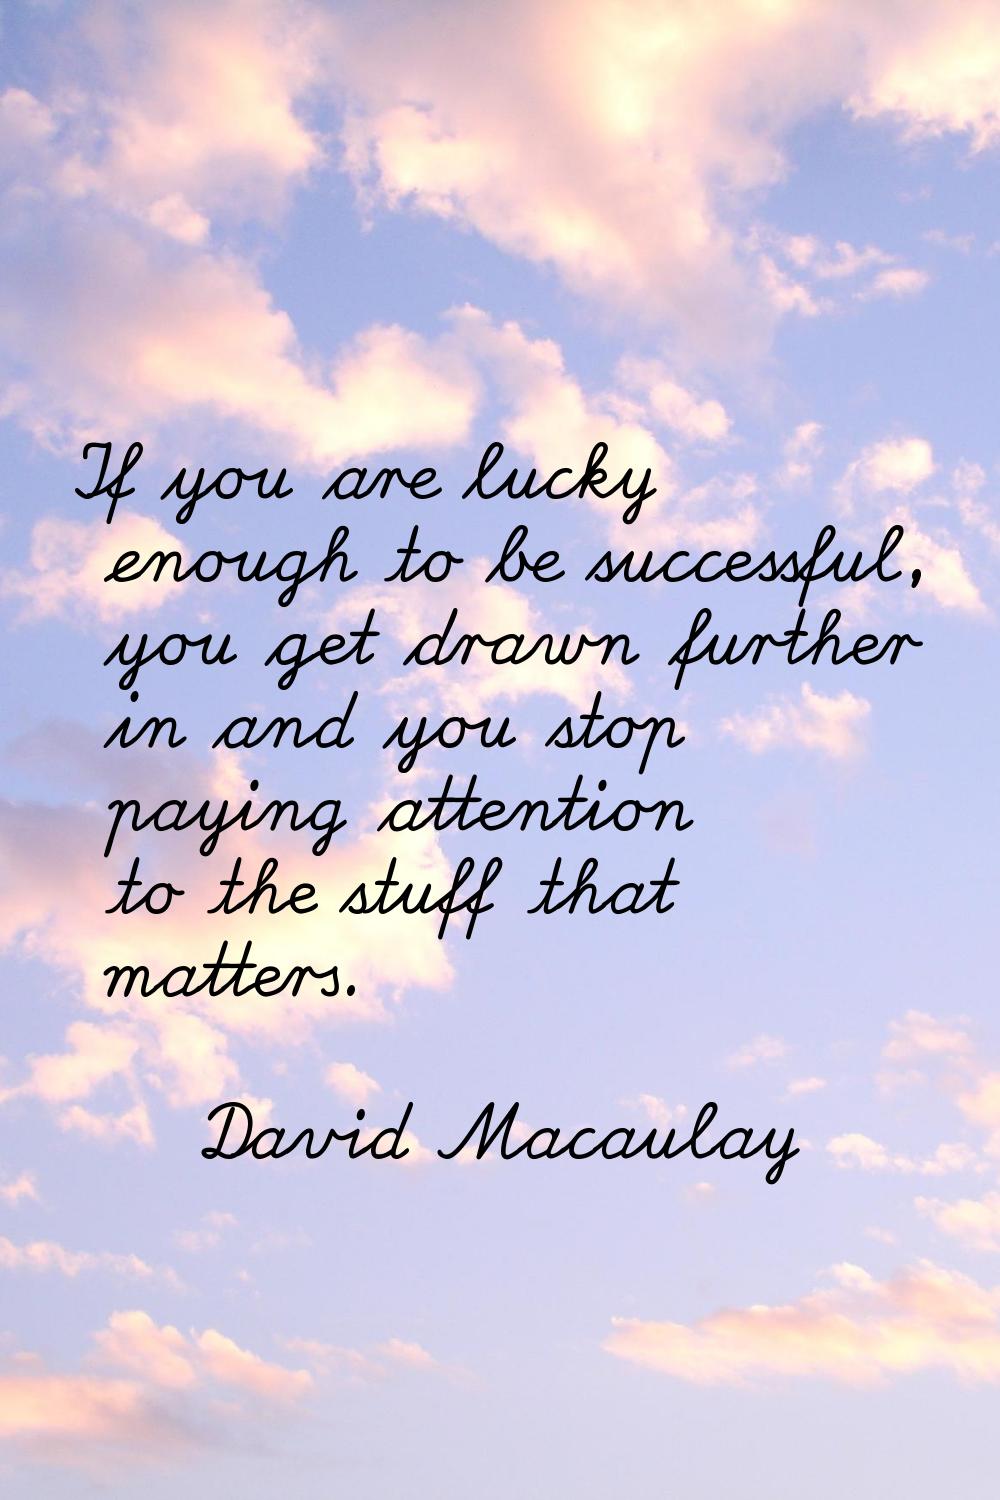 If you are lucky enough to be successful, you get drawn further in and you stop paying attention to